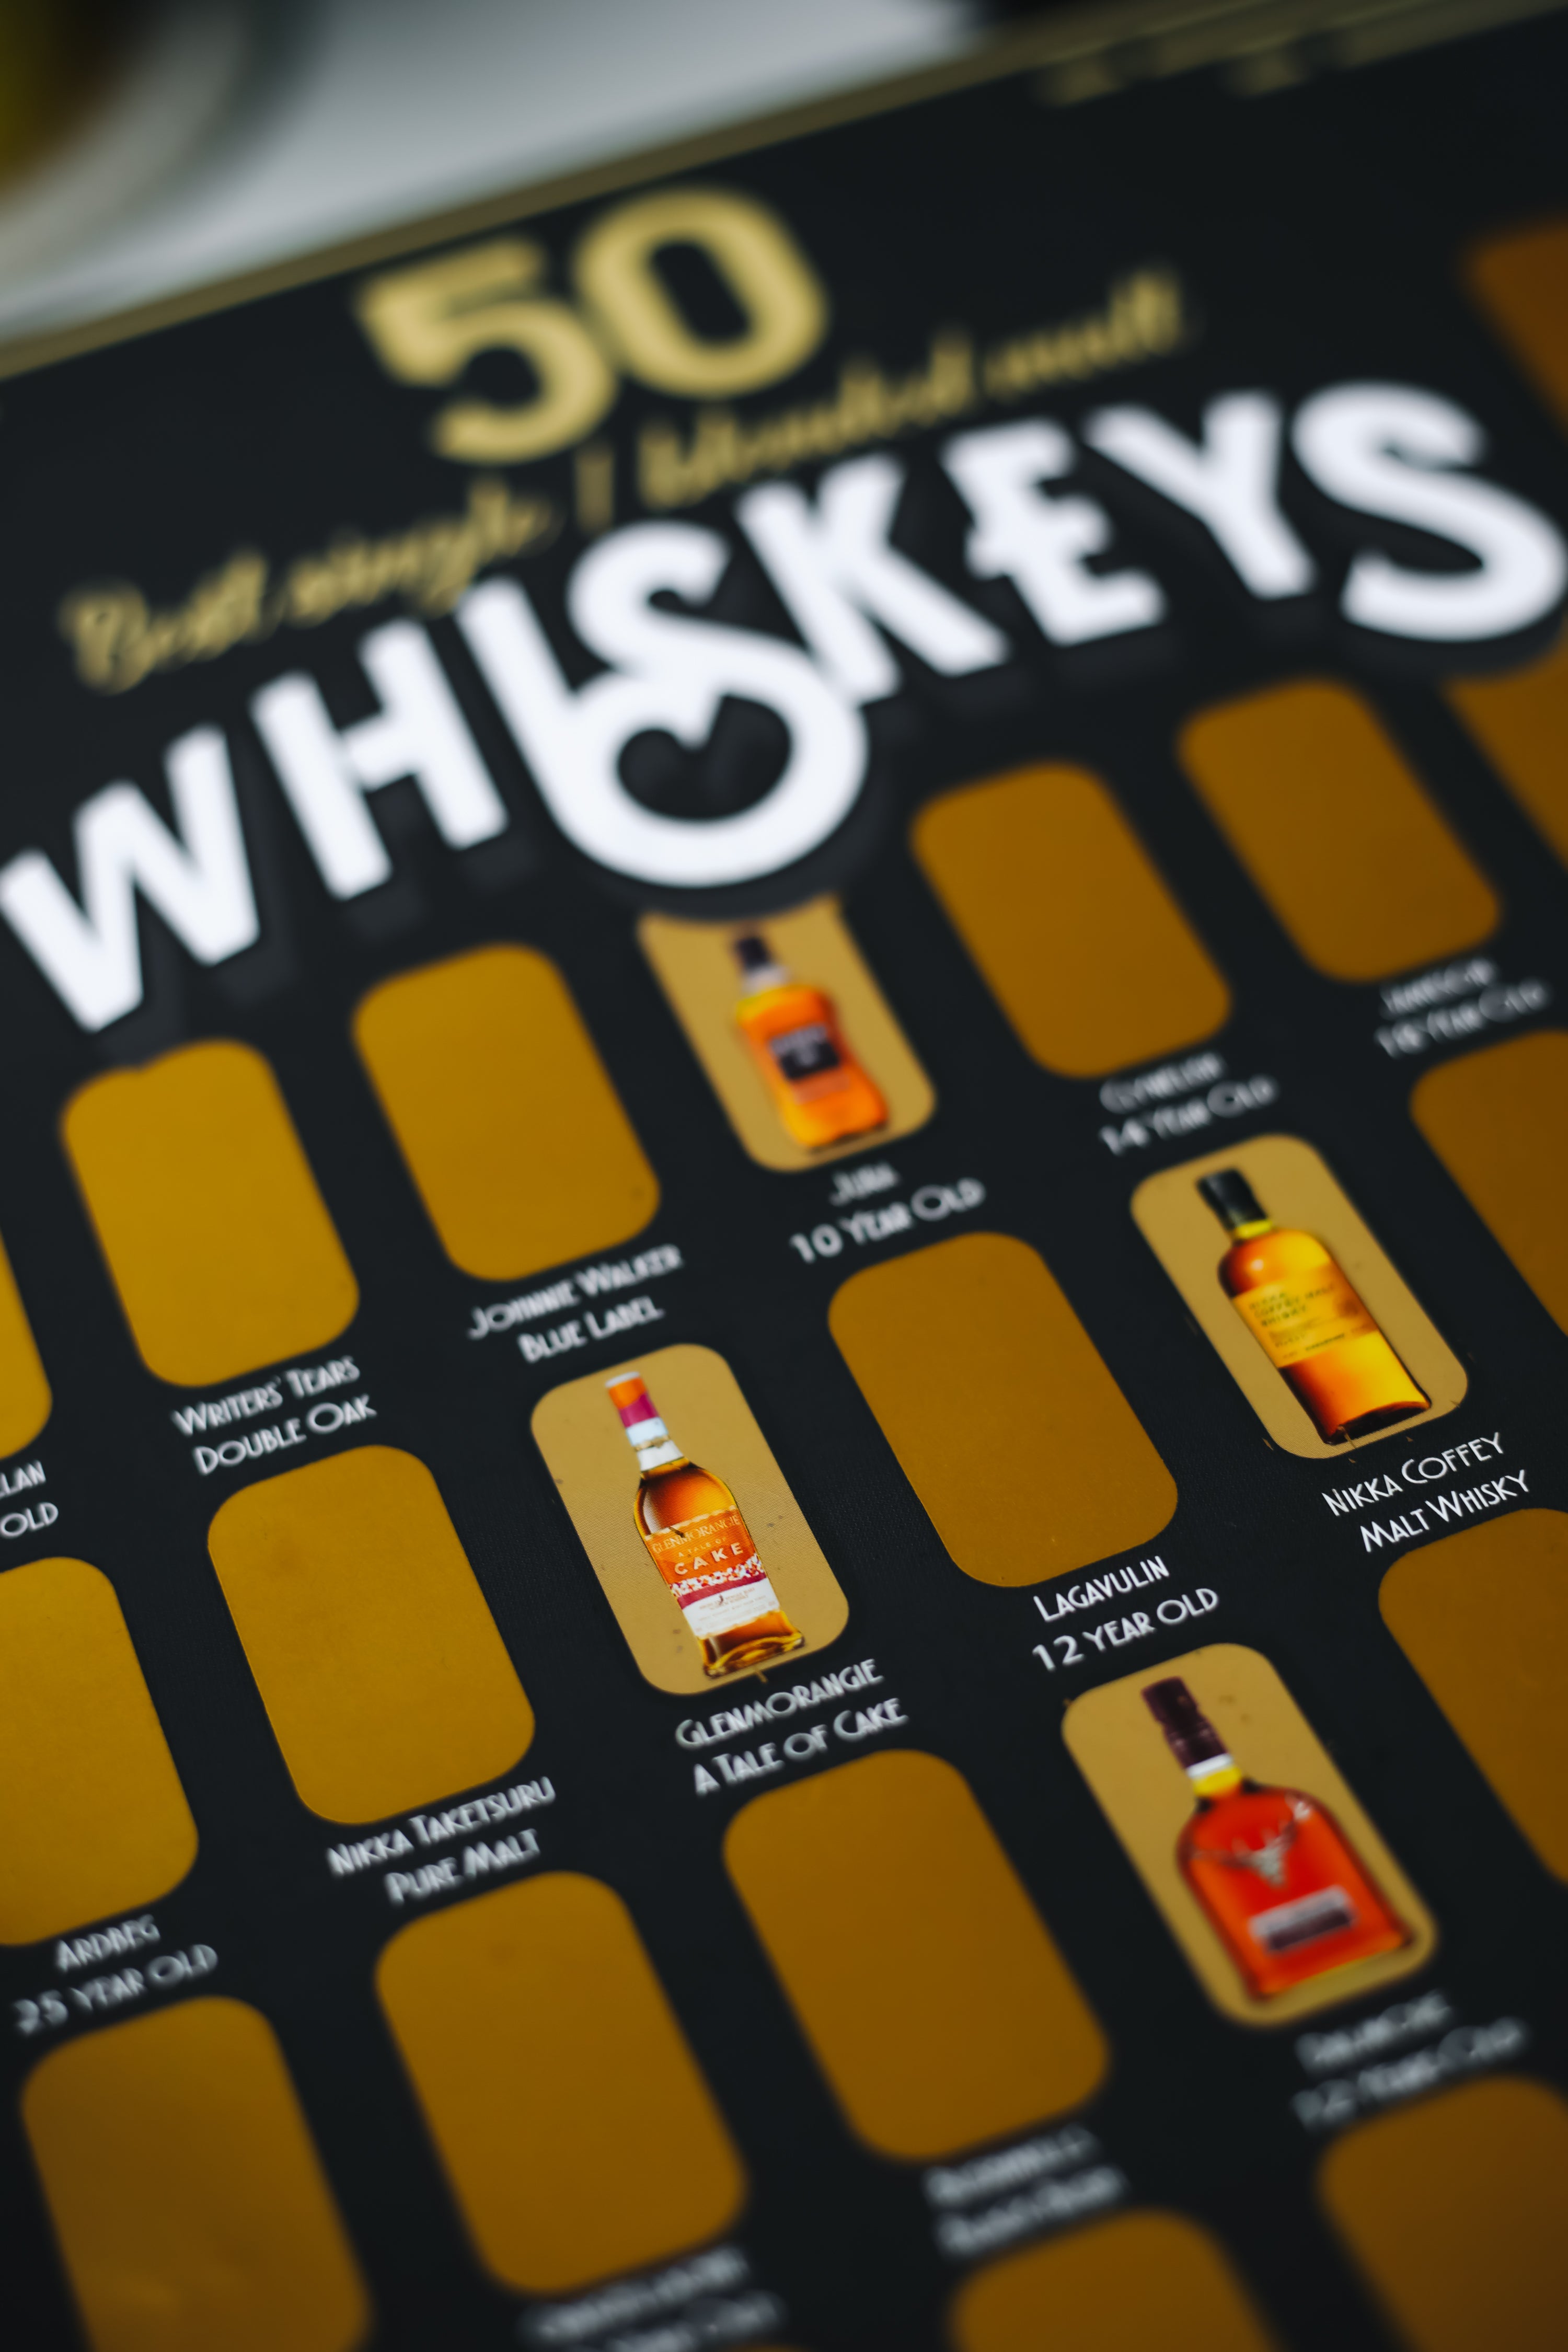 Whiskey poster - the 50 best bourbons or a poster with whiskey - for whiskey lovers, a bar, a game room - dad gift